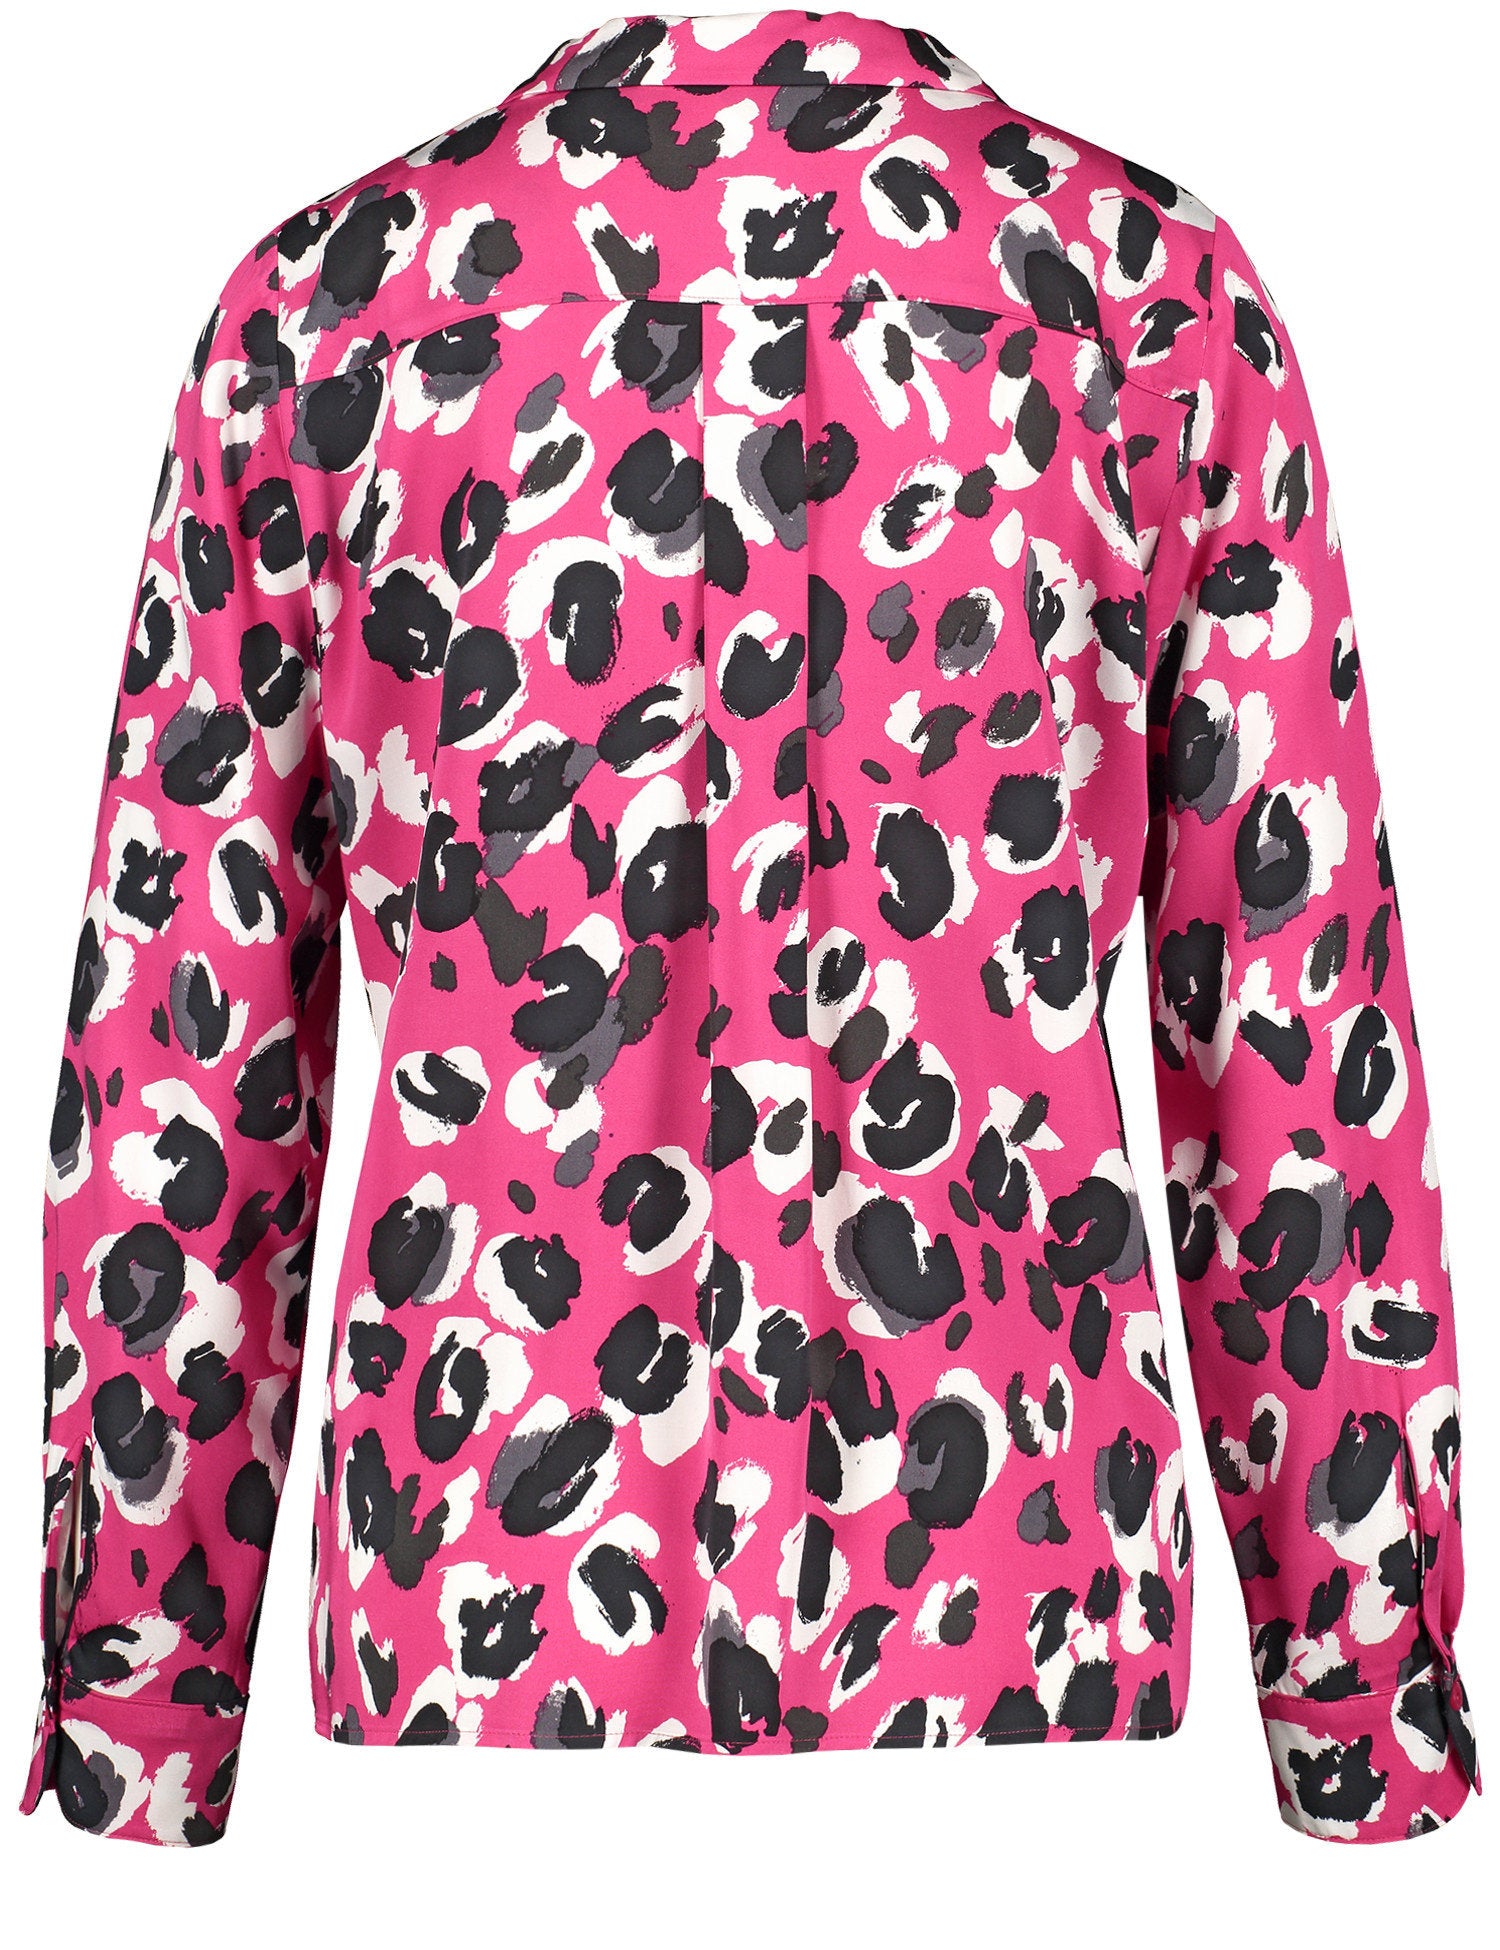 Blouse With An Animal Print_460420-11210_3402_03